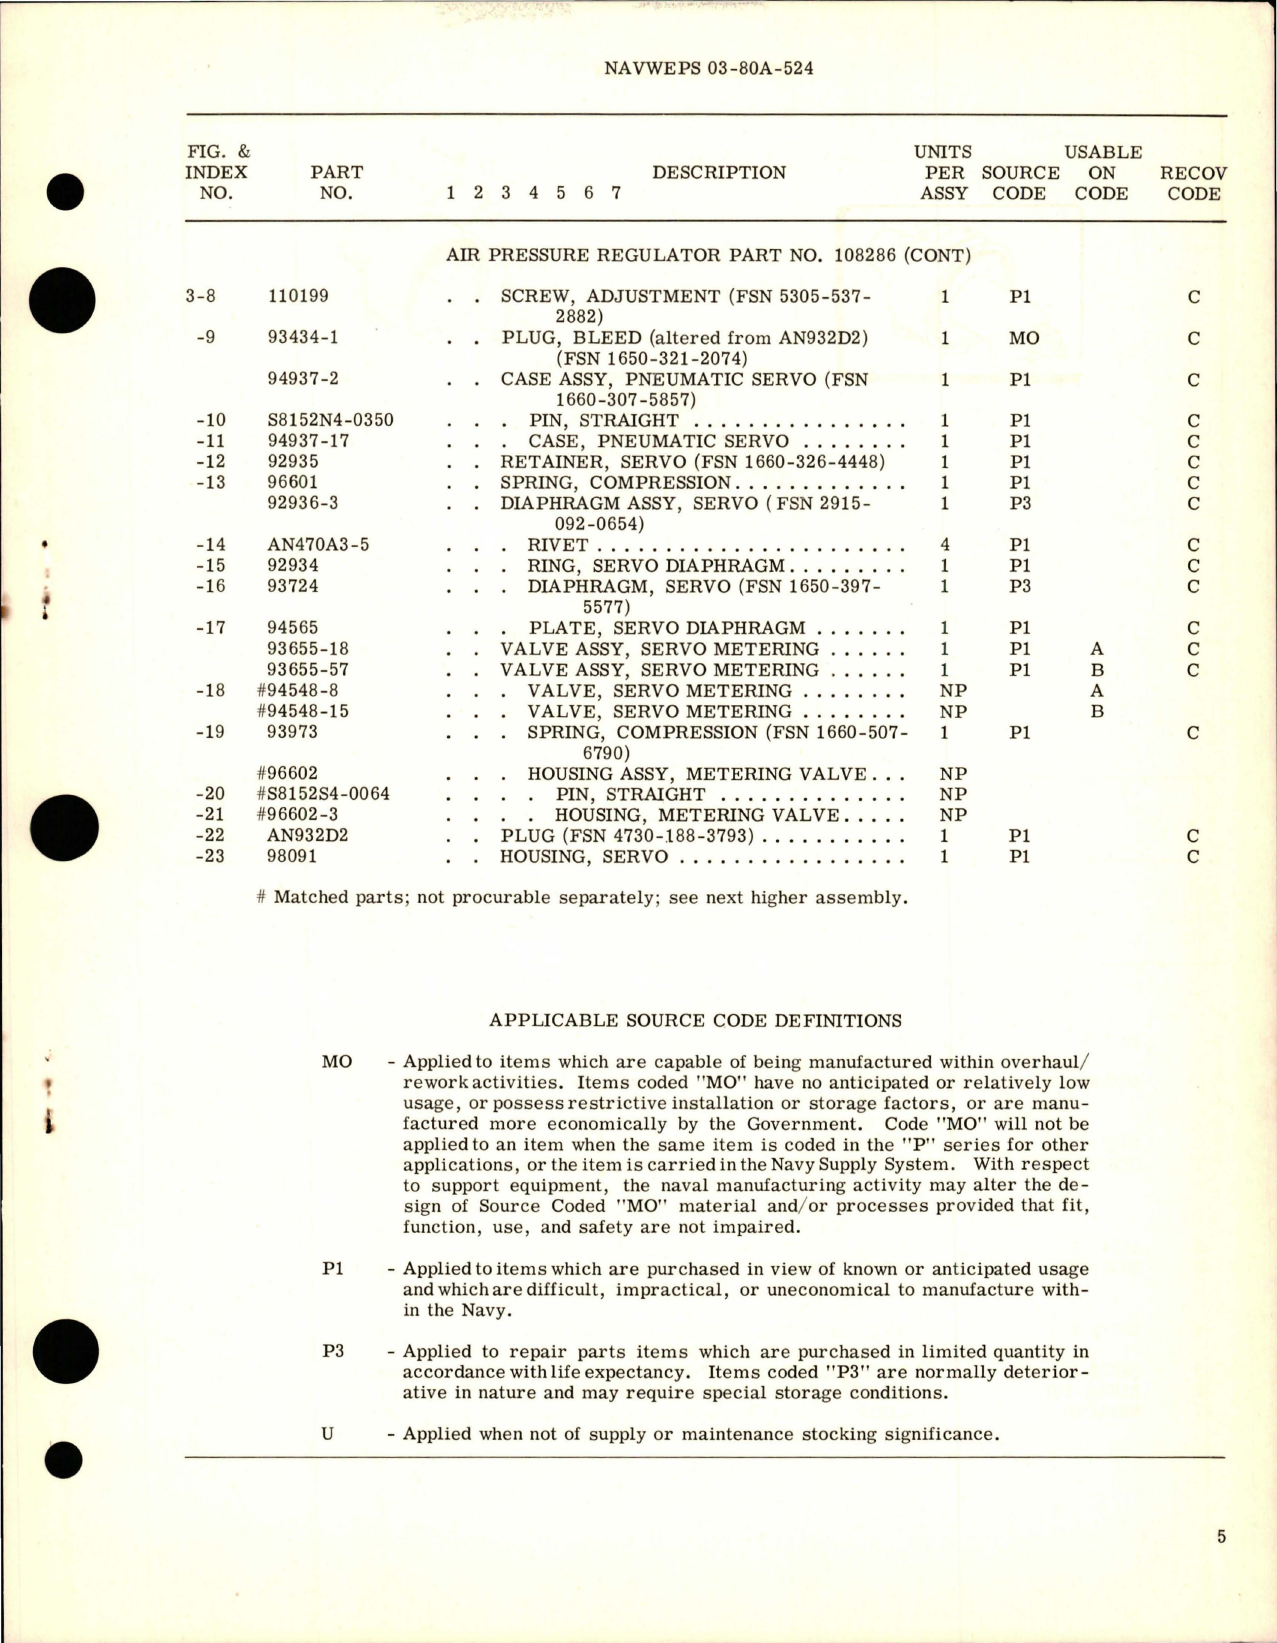 Sample page 5 from AirCorps Library document: Overhaul Instructions w Parts Breakdown for Air Pressure Regulator - Part 108286